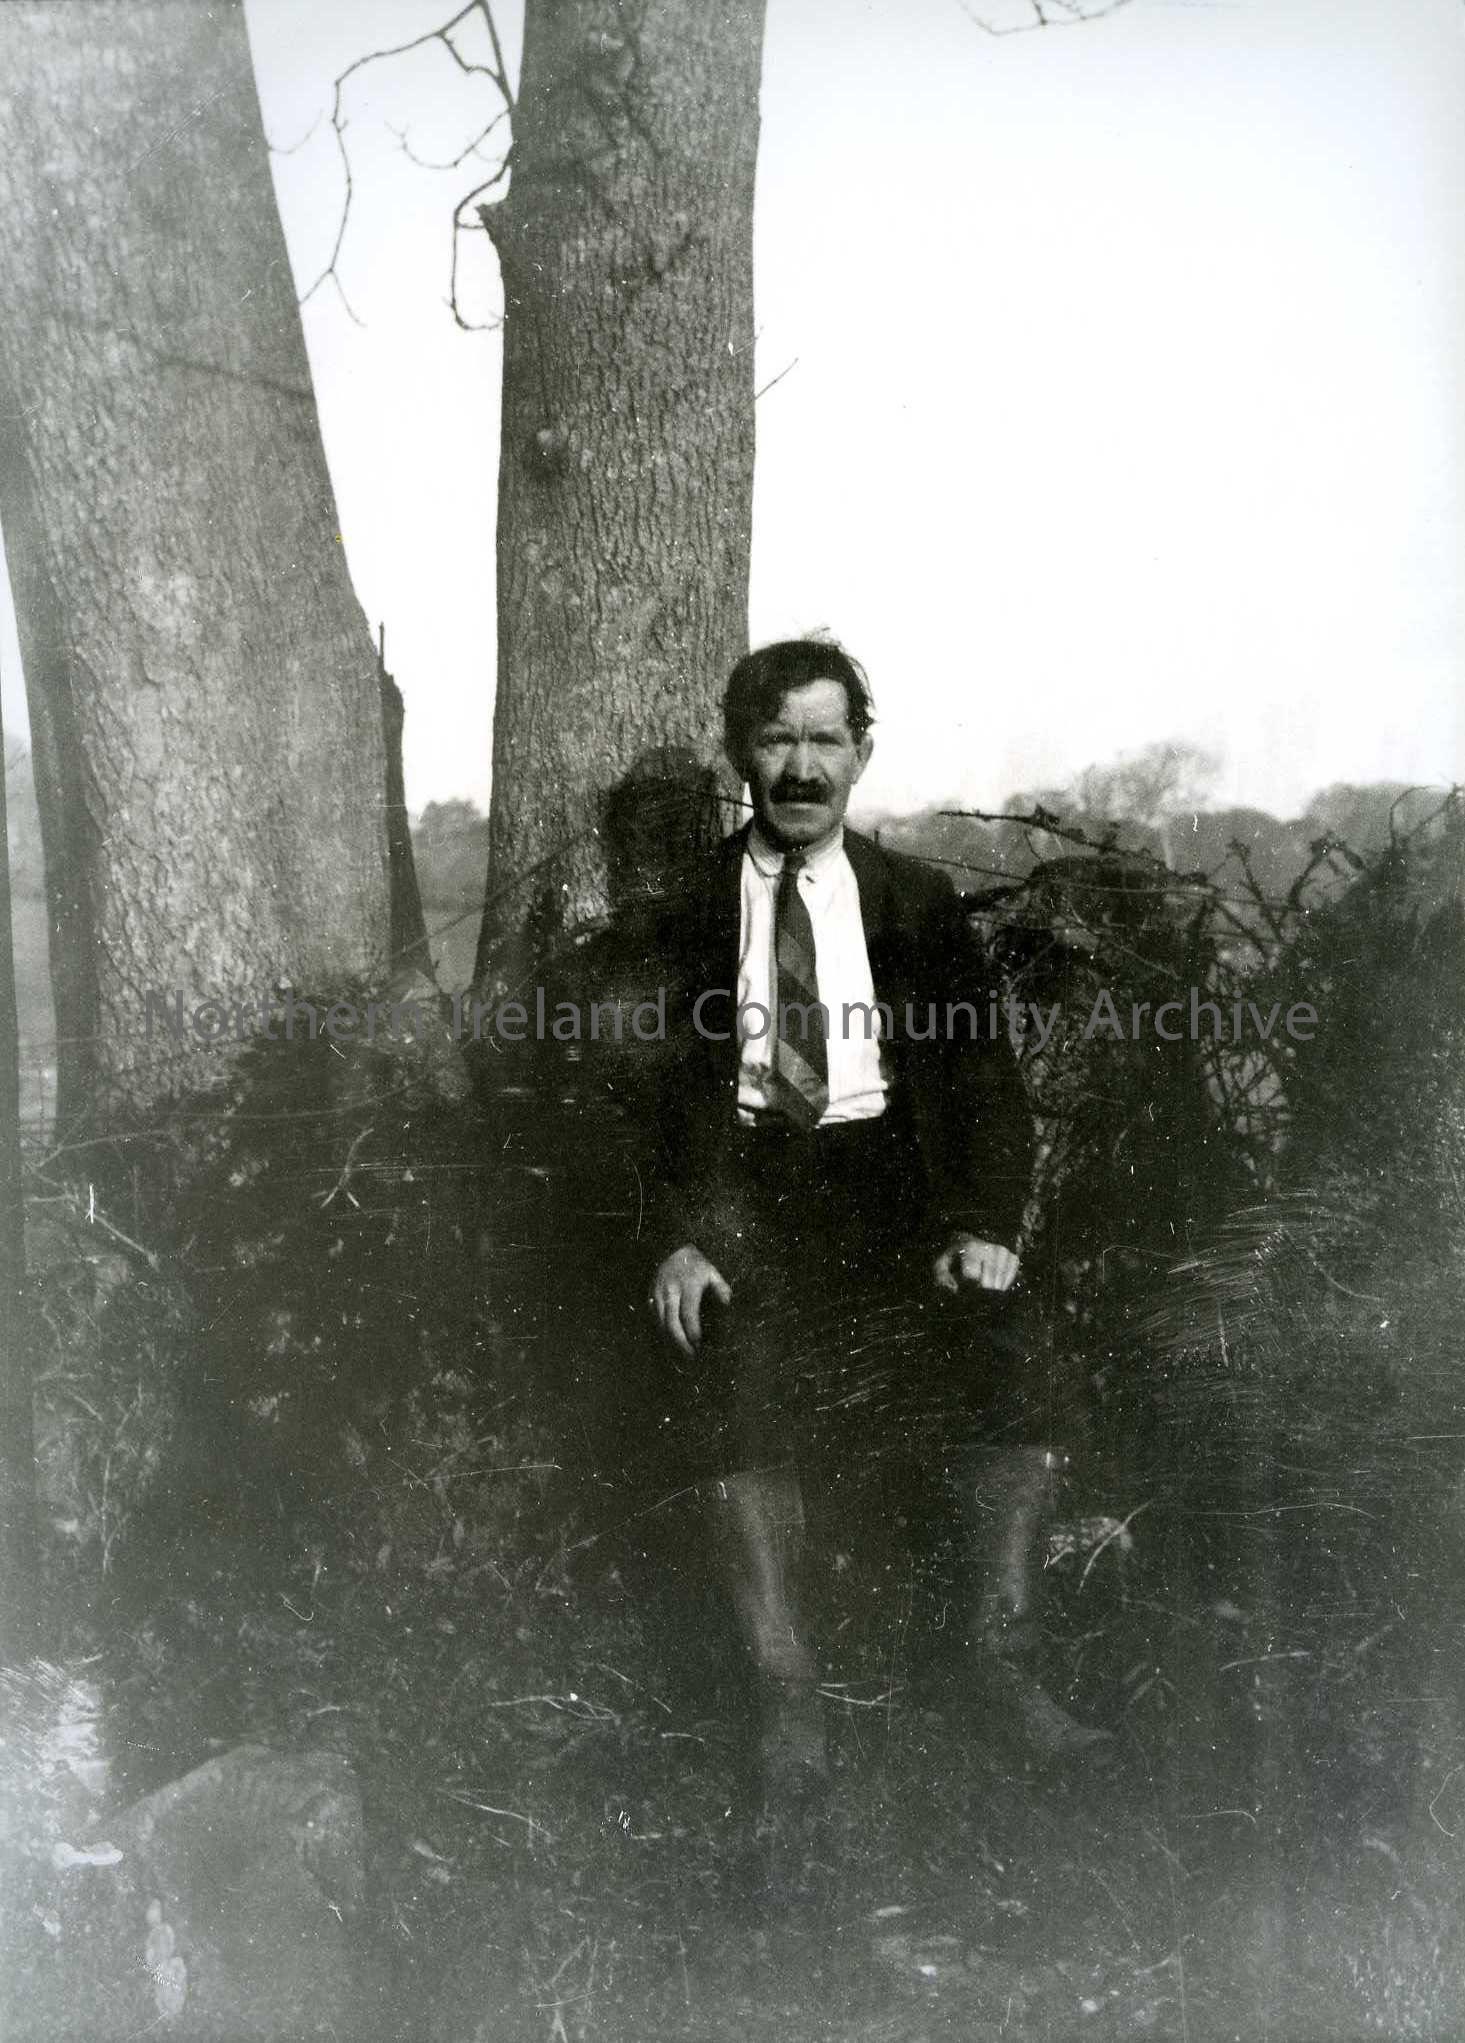 Printed black and white photograph – Man in shirt and tie wearing wellington boots sits in front of trees.